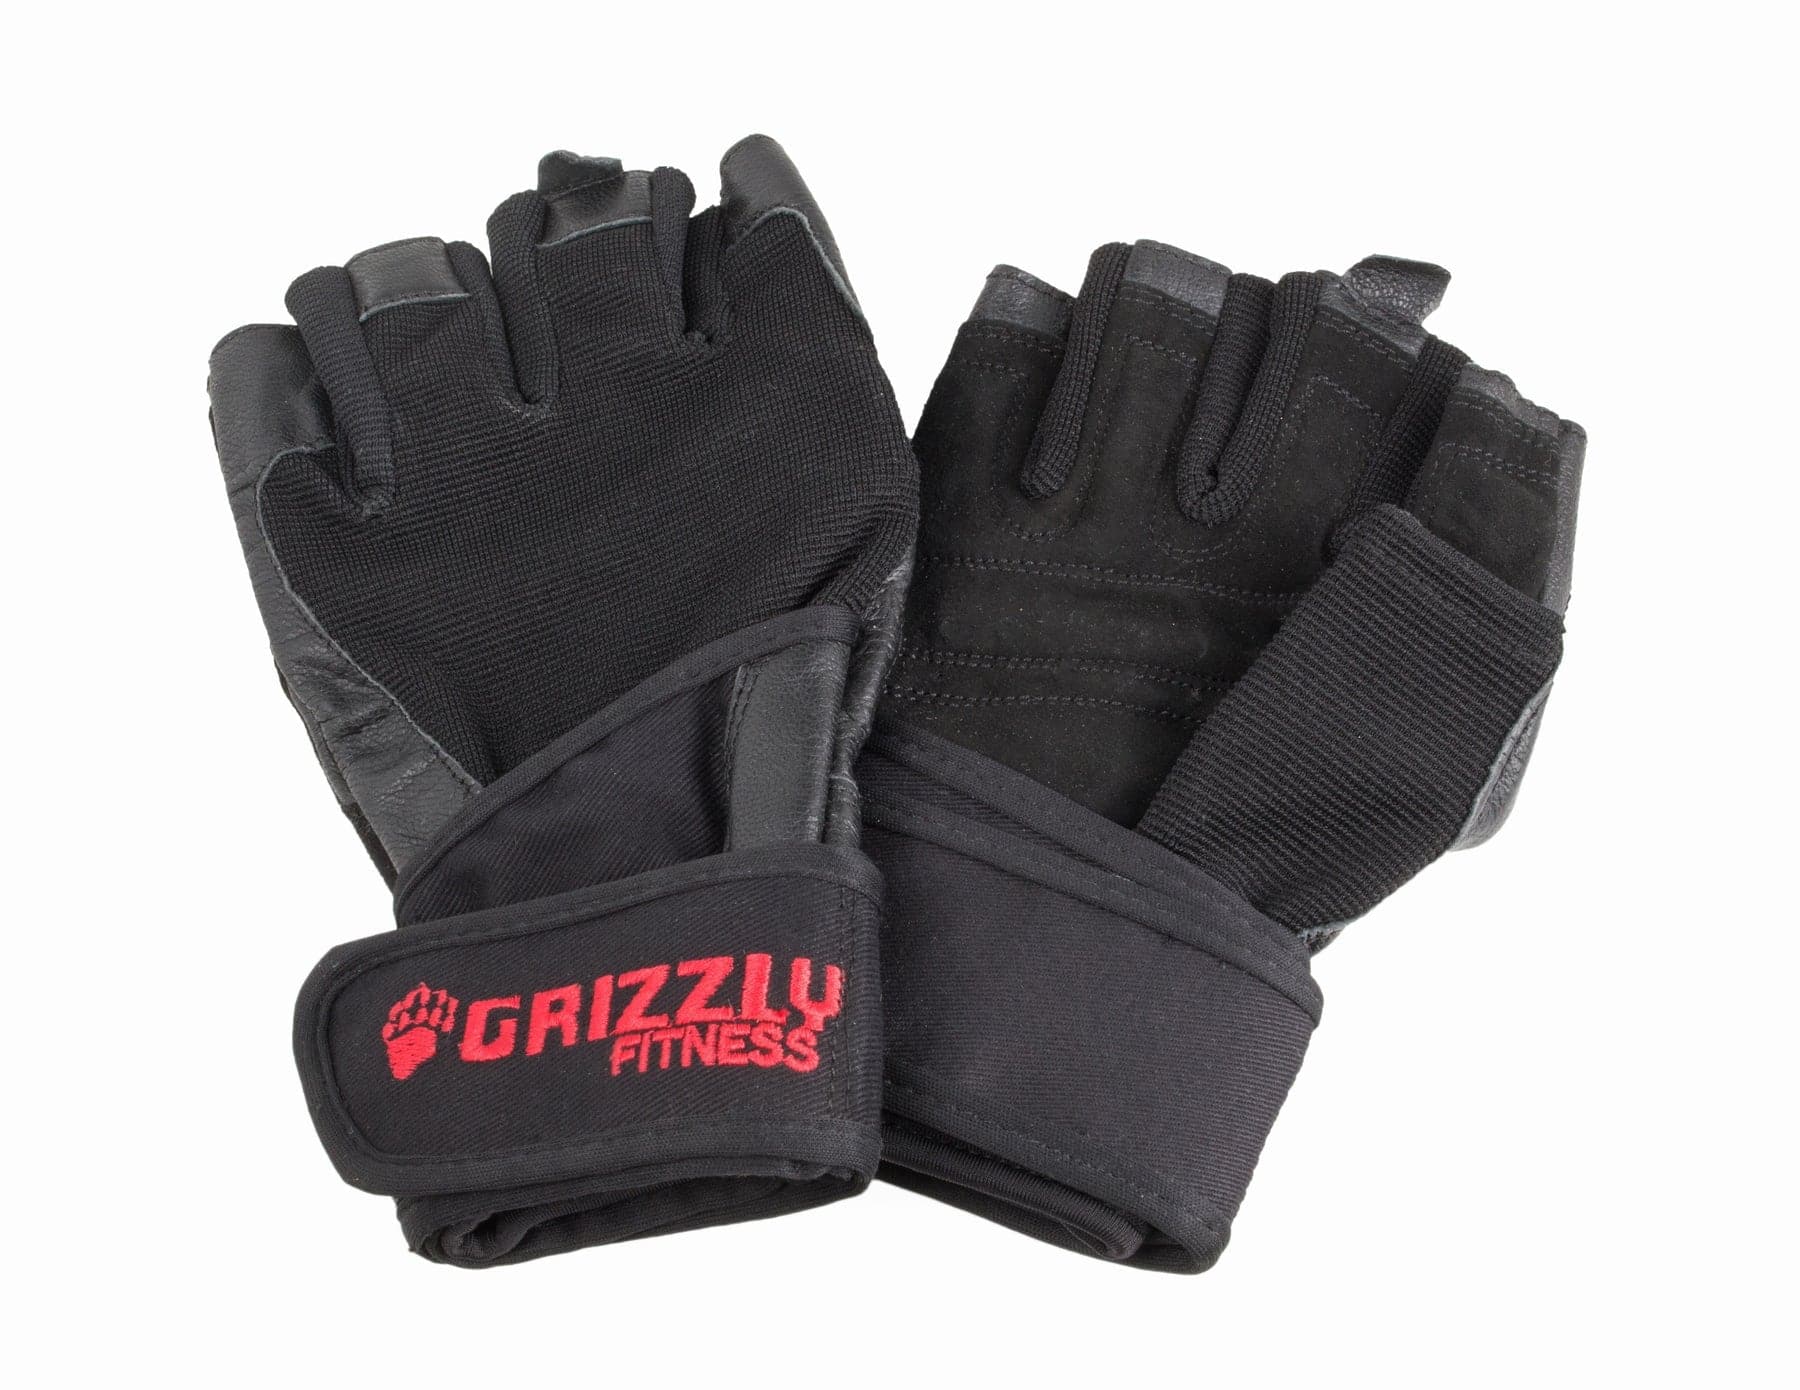 Grizzly Fitness Nytro Wrist Wrap Lifting and Training Gloves | Fit Men or Women | Extra Durable and Flexible